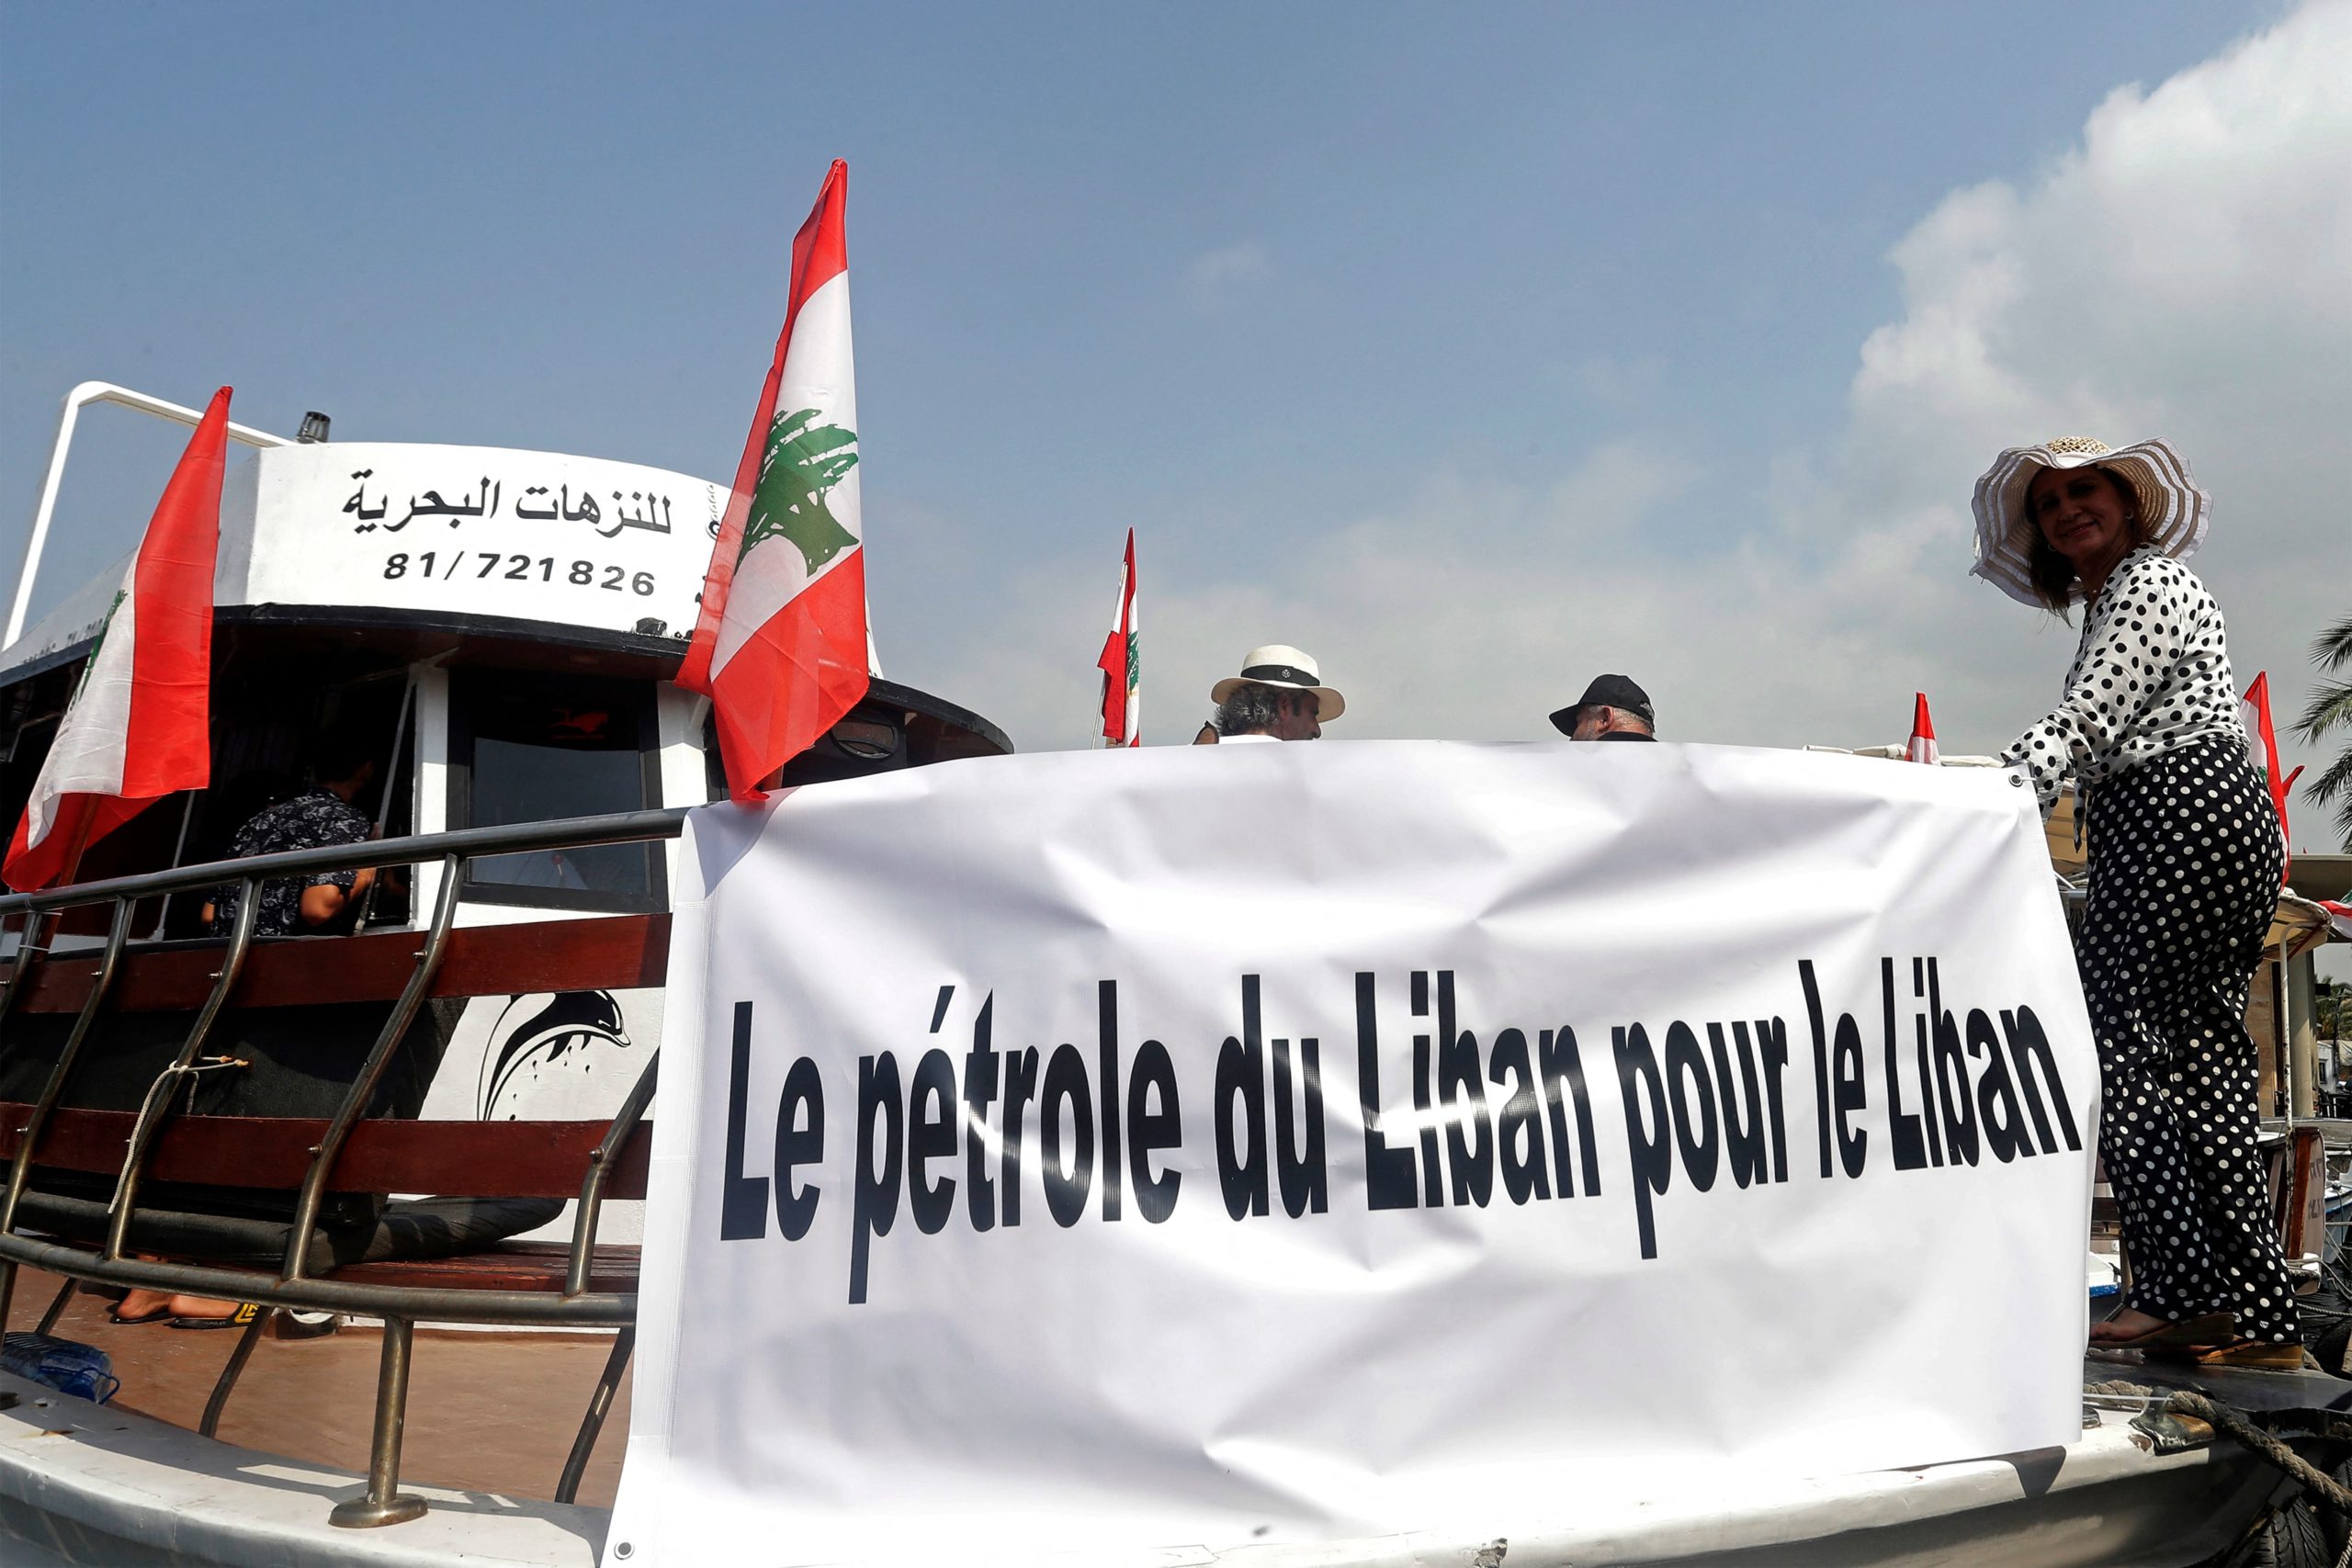 Lebanese protesters take part in a rally by sailing in boats with slogans in French affirming Lebanon's right to its offshore gas wealth, from the southern coastal city of Tyre towards Naqoura near the maritime border with Israel on September 4, 2022. - The maritime border dispute between Lebanon and Israel escalated in early June, after Israel moved a production vessel to the Karish offshore field, which is partly claimed by Lebanon. The move prompted Beirut to call for the resumption of US-mediated negotiations on the demarcation dispute.